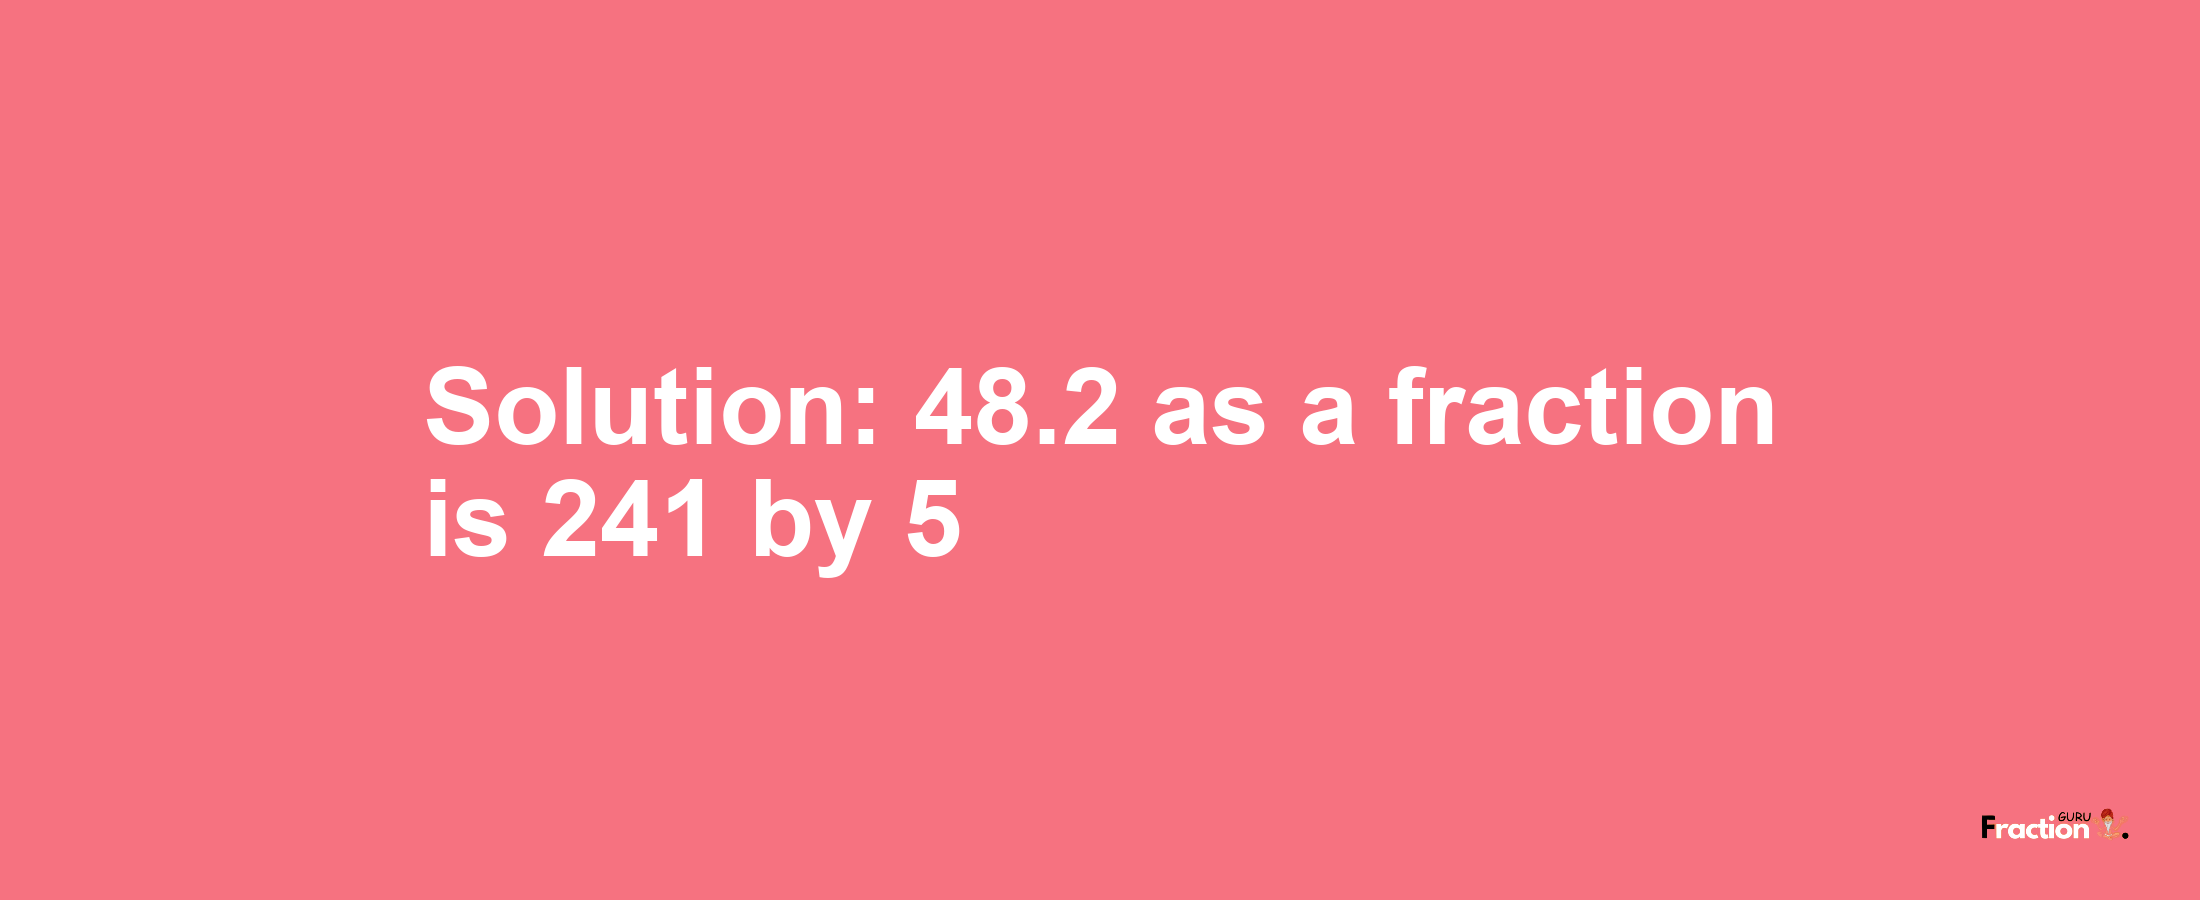 Solution:48.2 as a fraction is 241/5